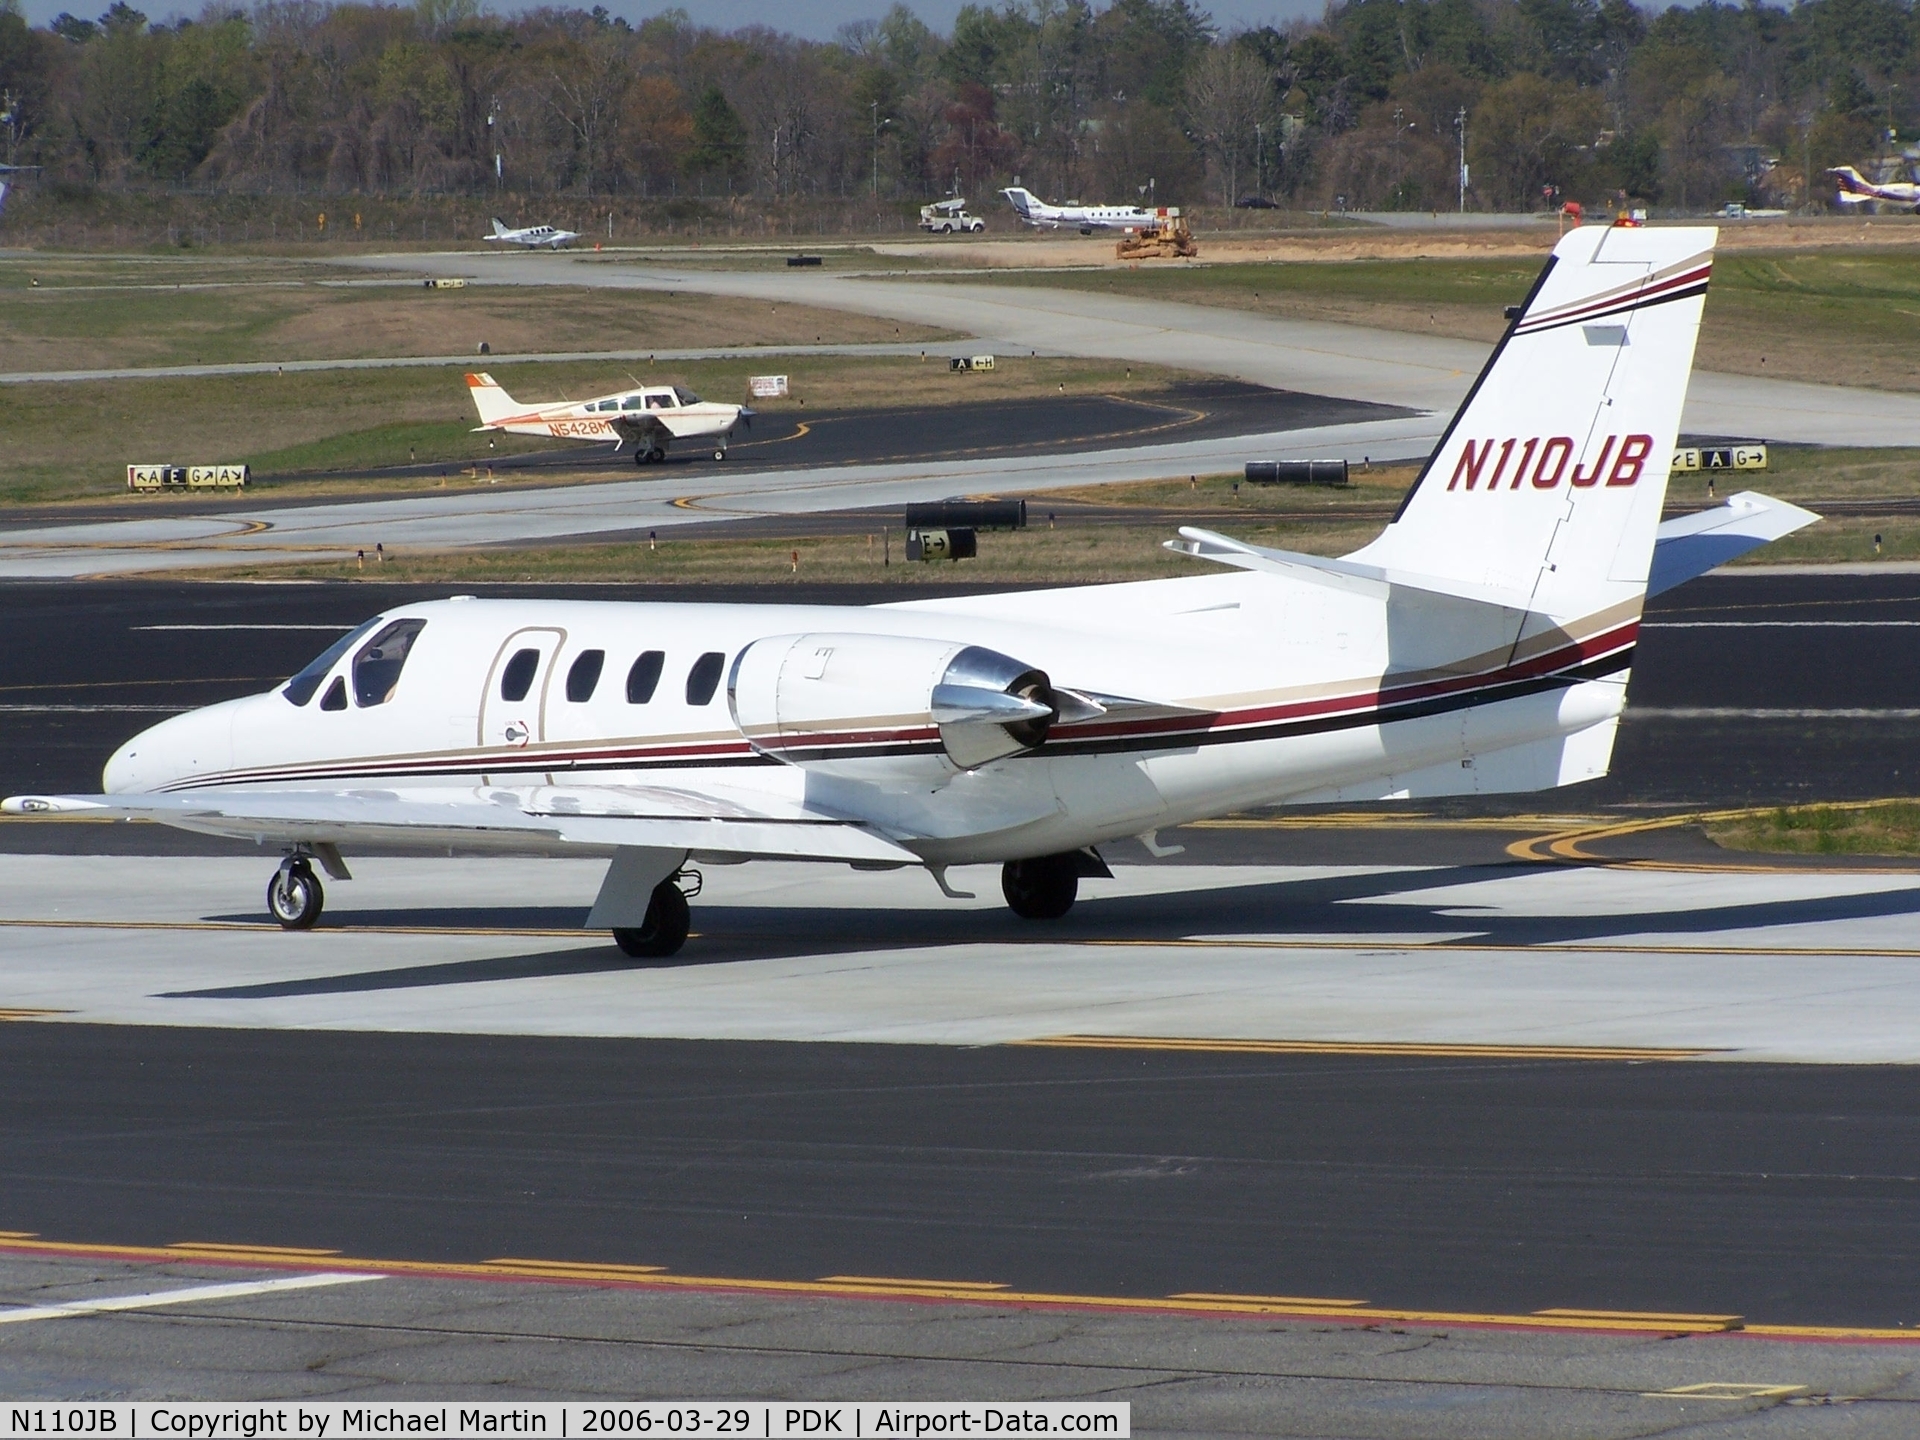 N110JB, 1981 Cessna 501 Citation I/SP C/N 501-0172, Taxing to Epps Air Service